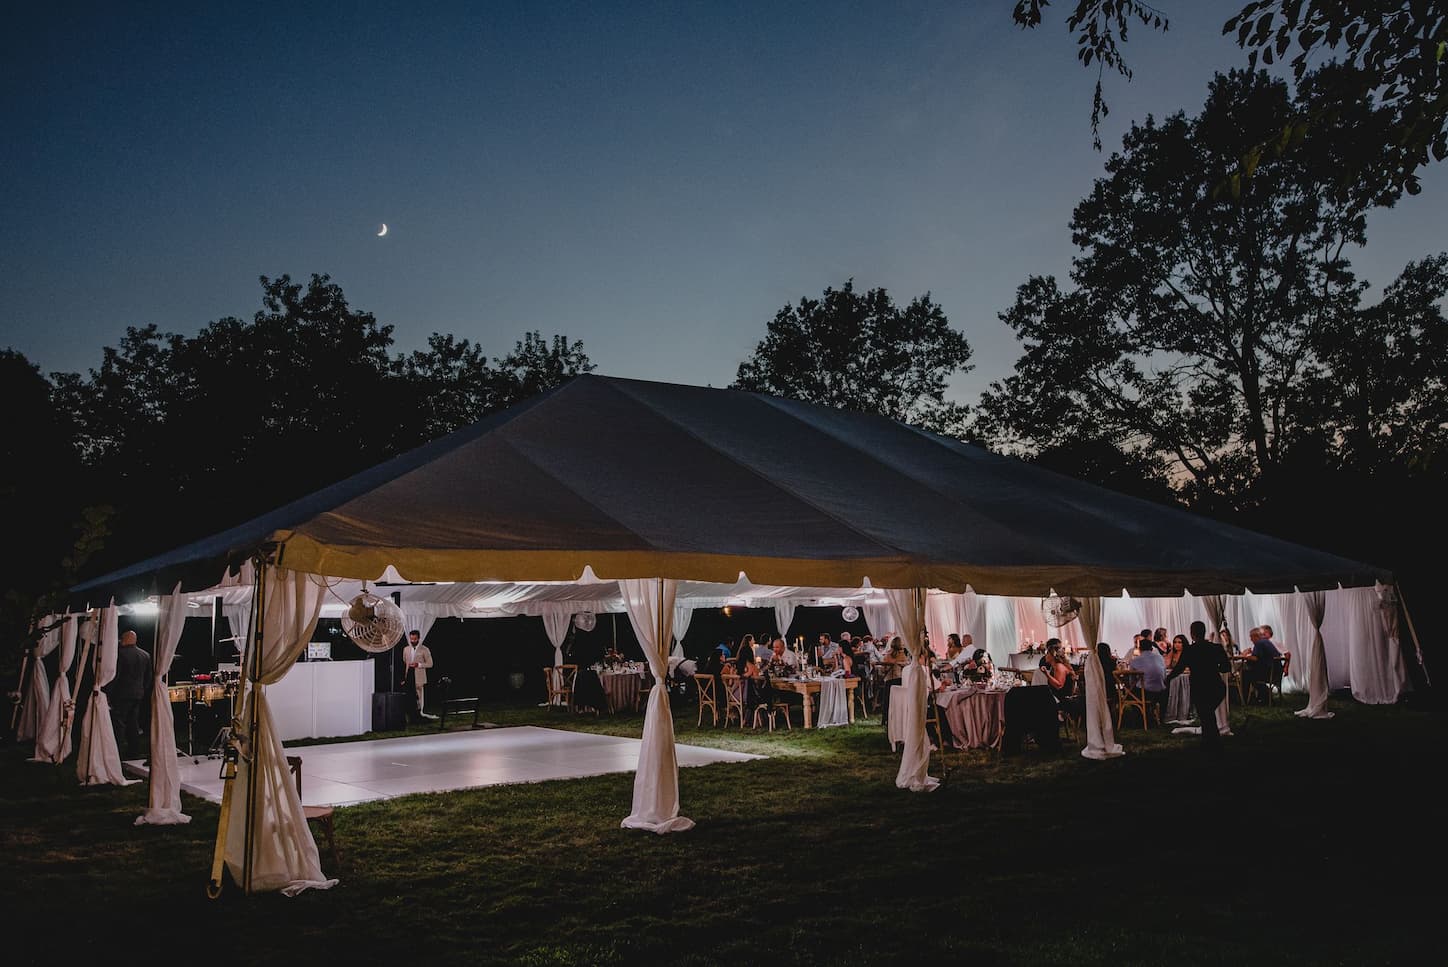 an outdoor wedding tent lit up at night